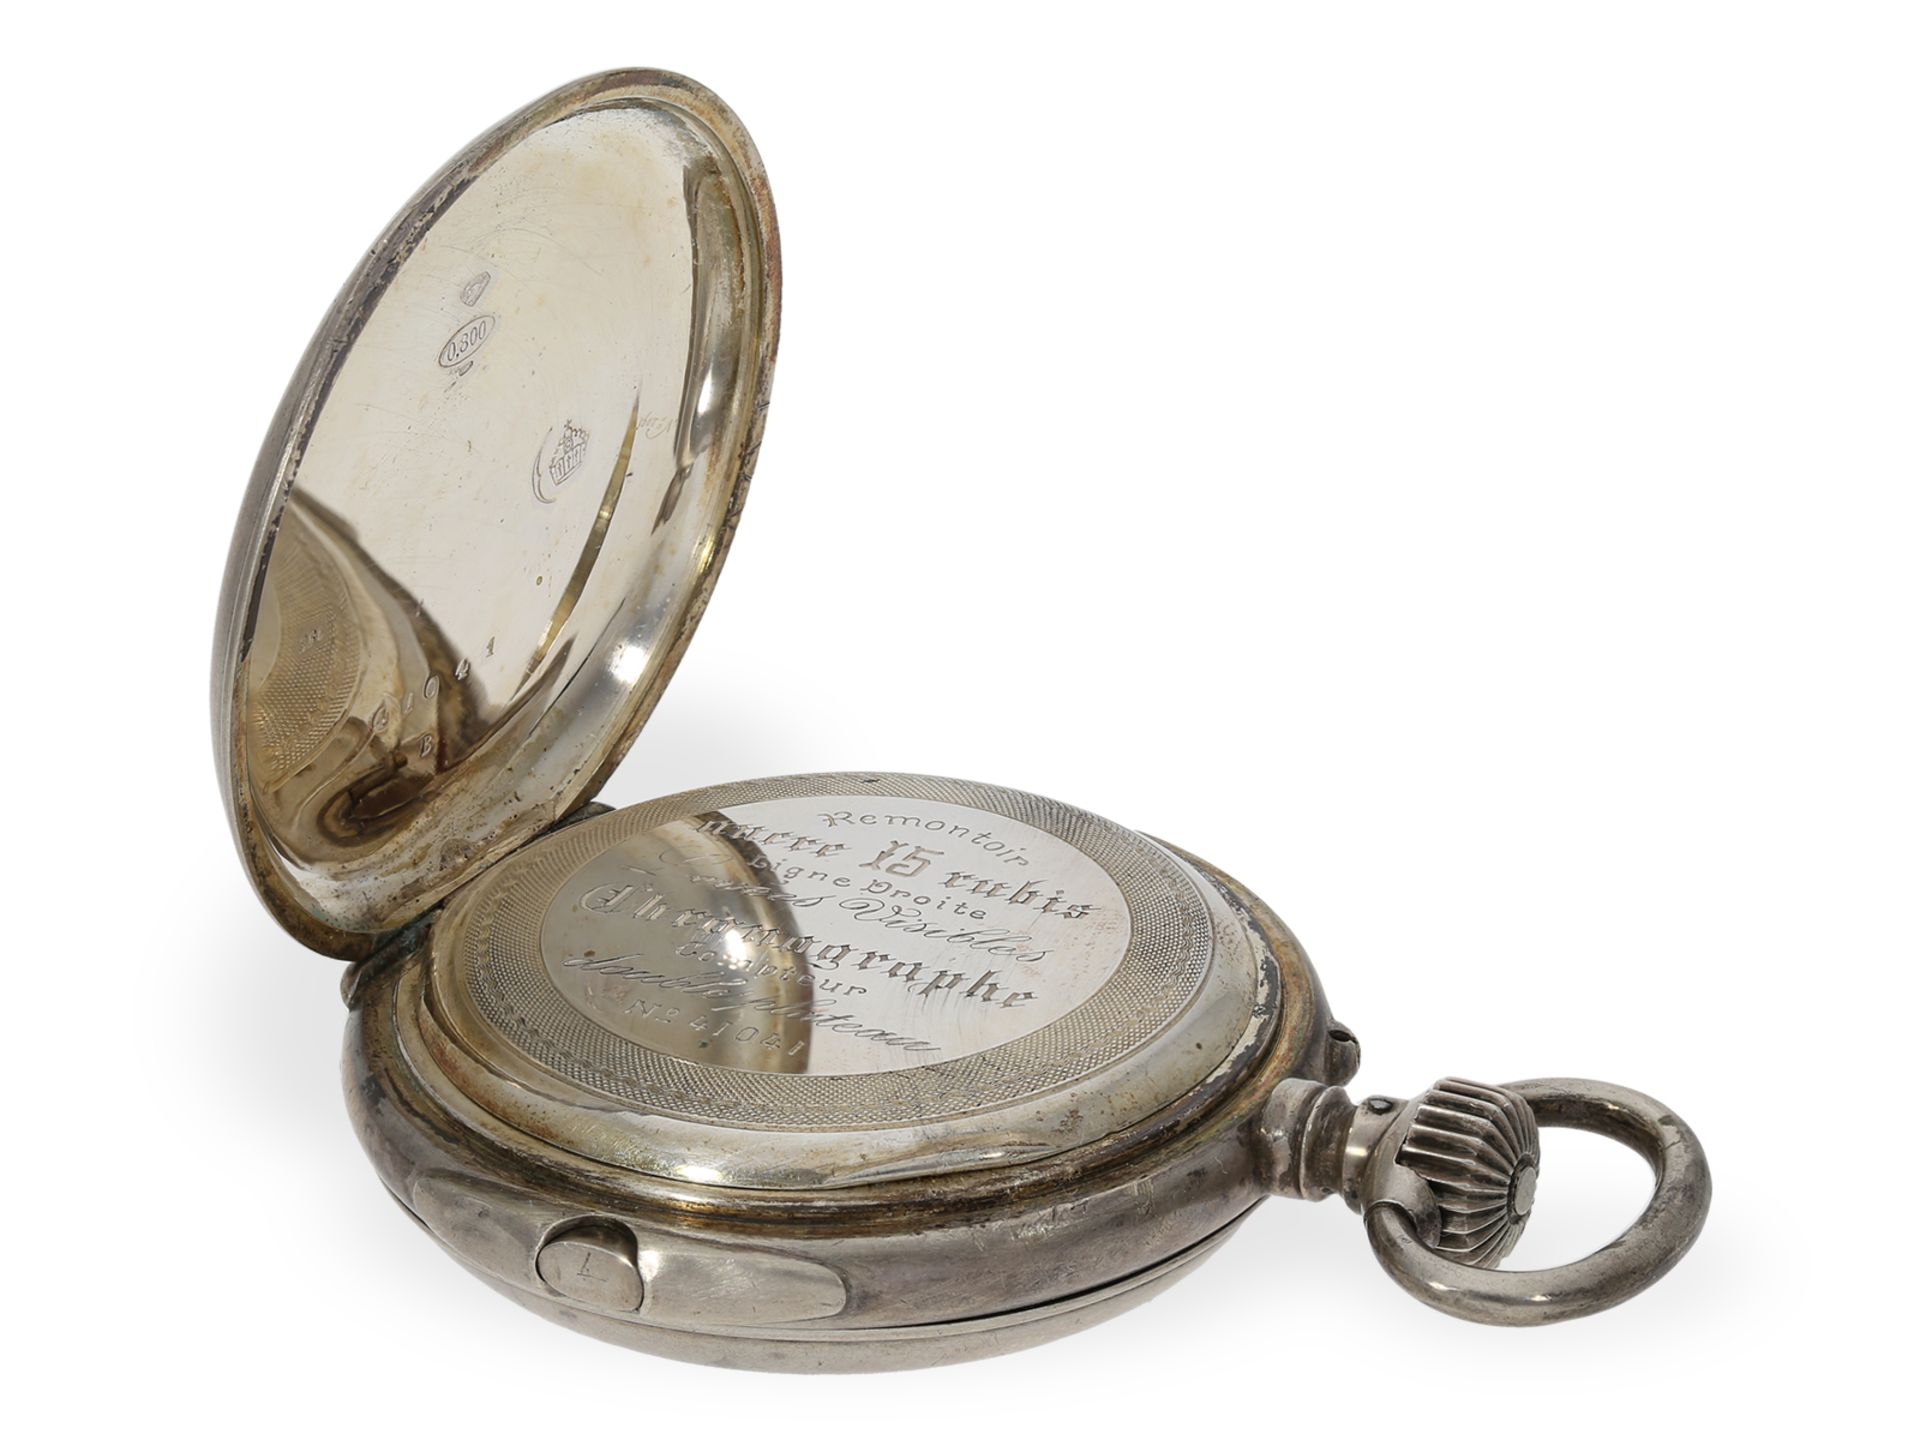 Pocket watch: technically interesting split-seconds chronograph, Bovet "Montre Universelle" ca. 1890 - Image 5 of 7